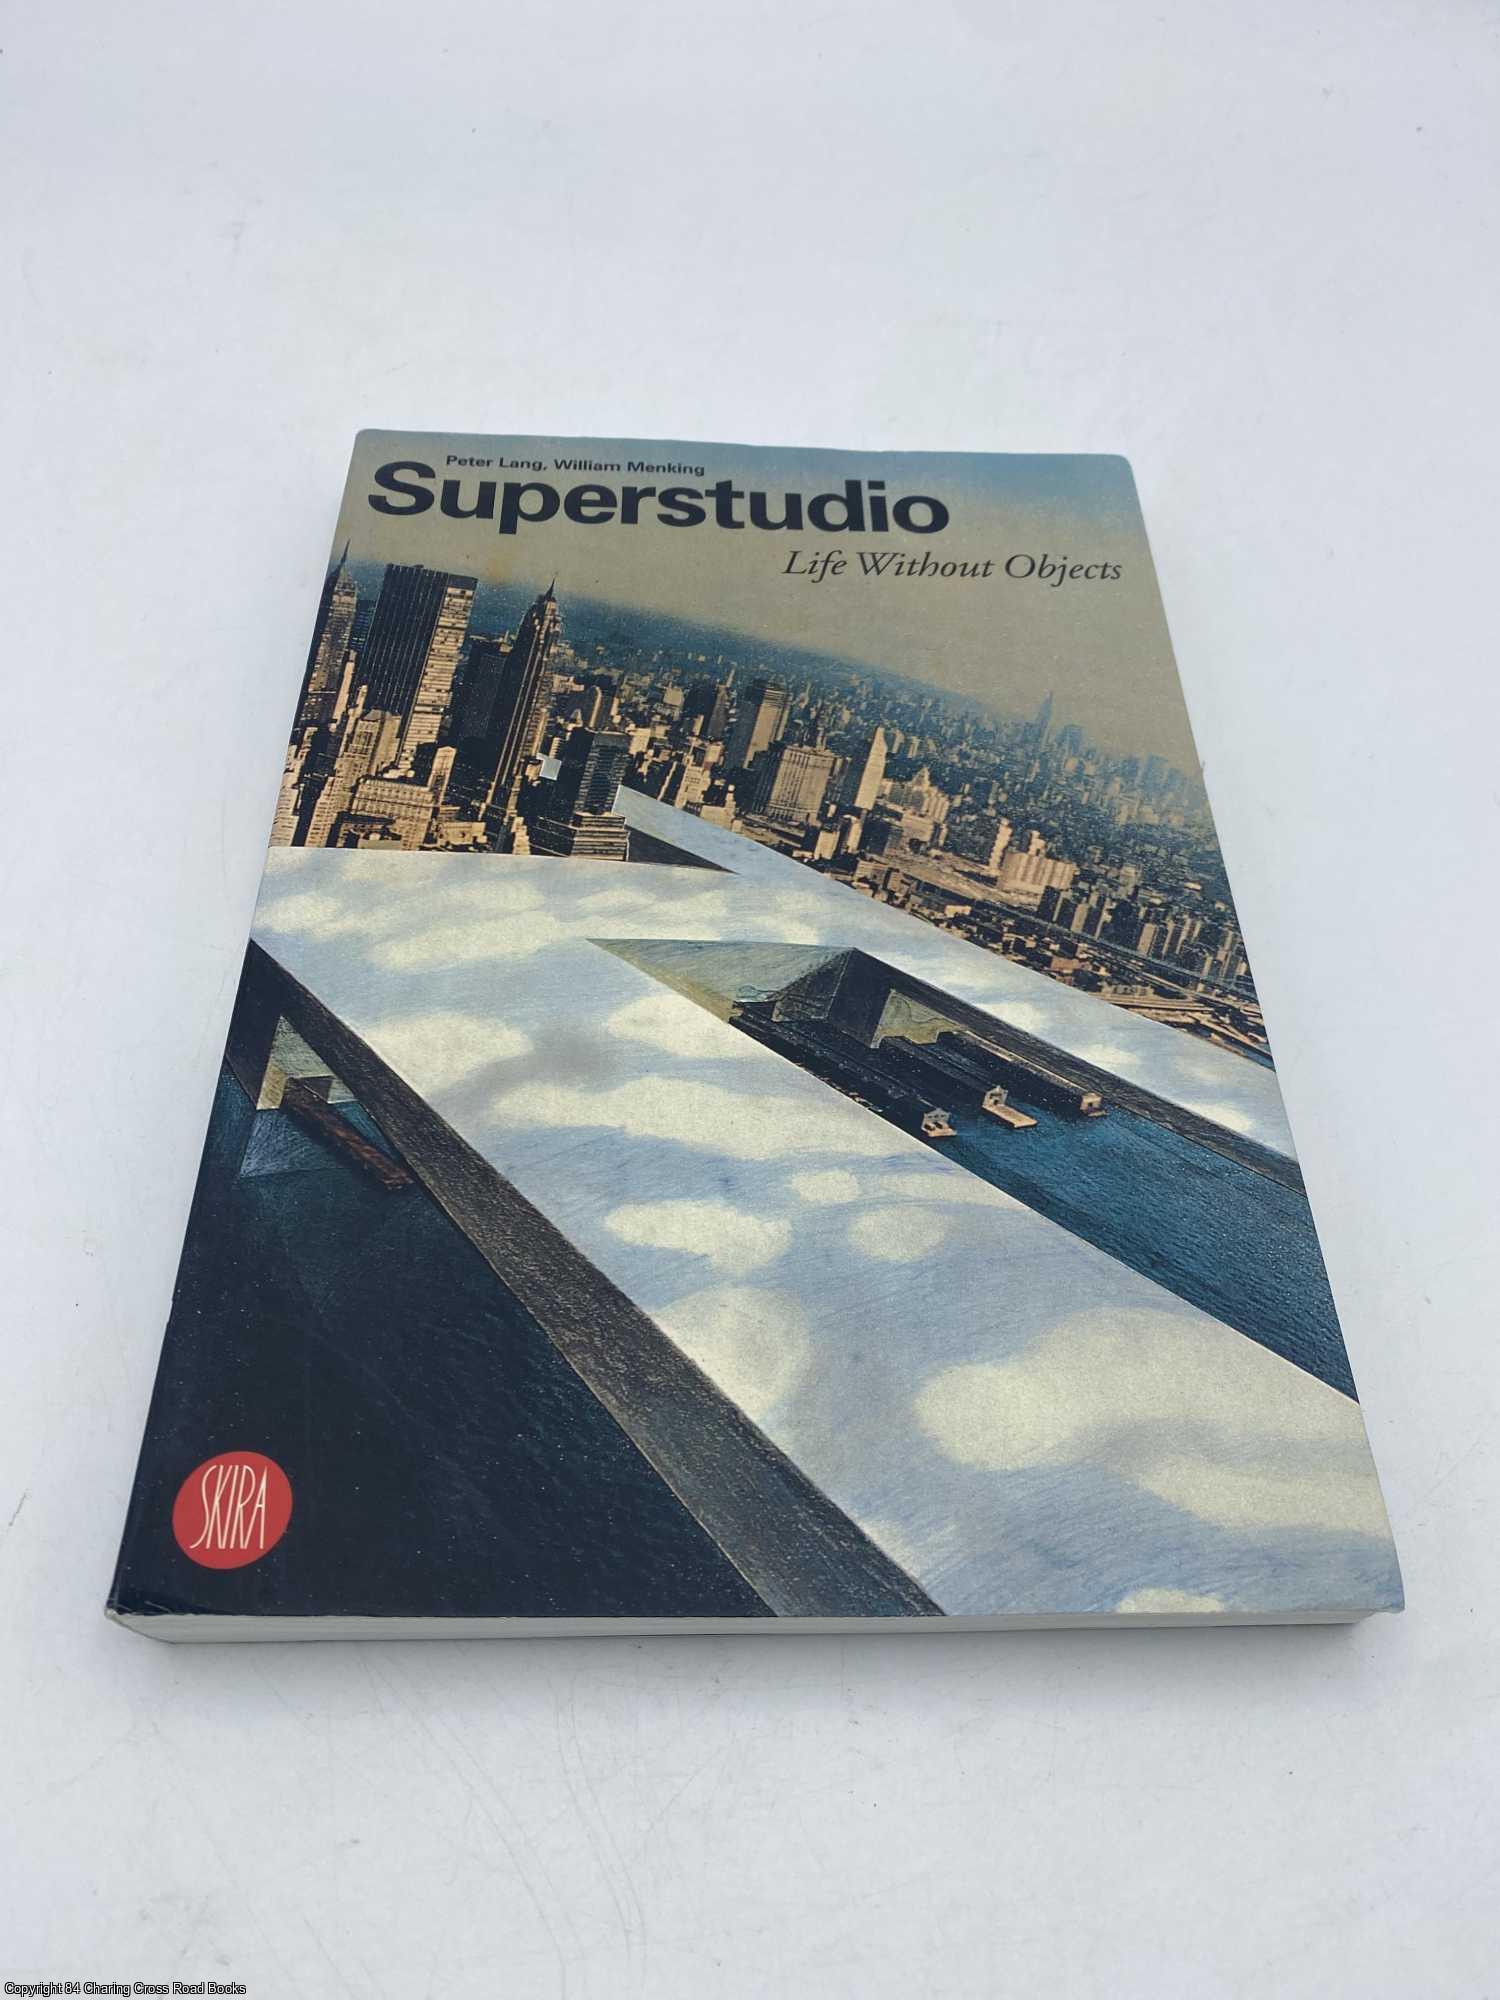 Superstudio Life Without Objects by Peter Lang, William Menking on 84  Charing Cross Rare Books